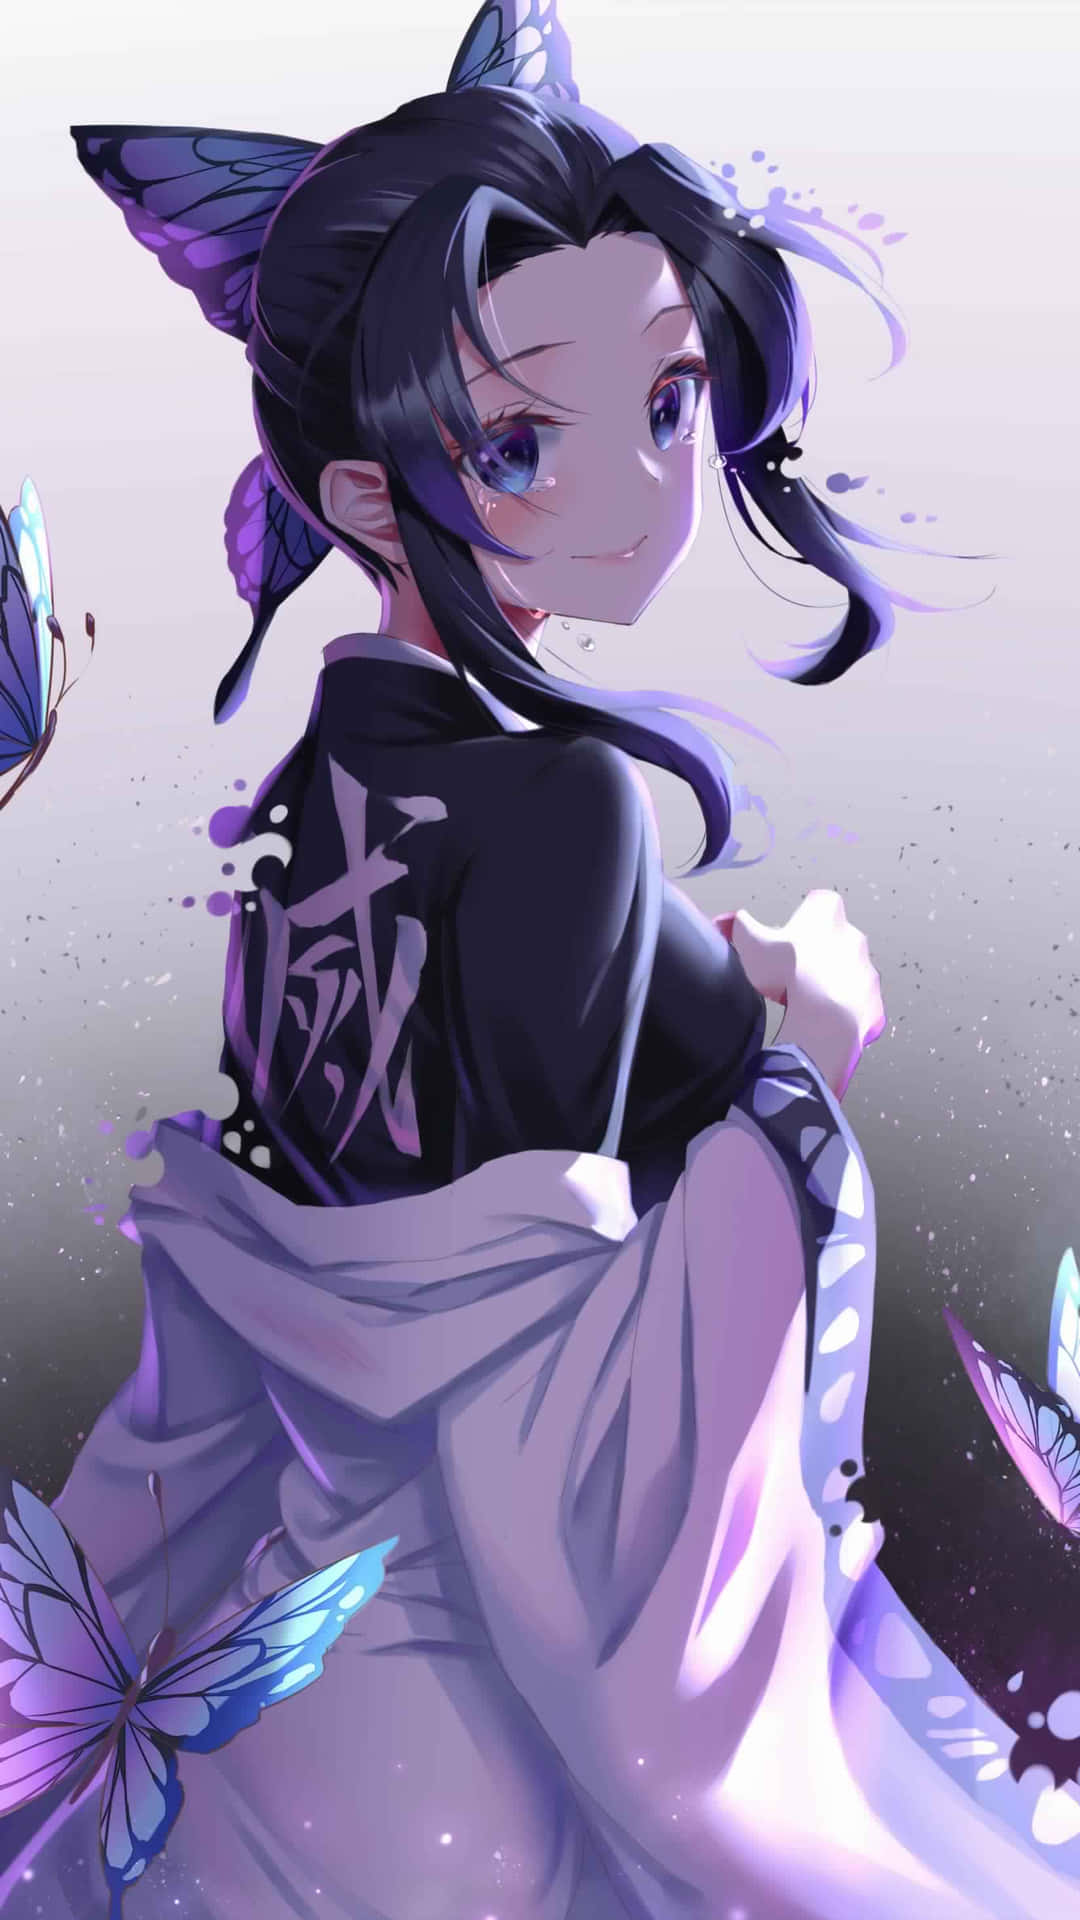 Rejuvenate Your Iphone With This Unique Cool Anime Iphone Wallpaper